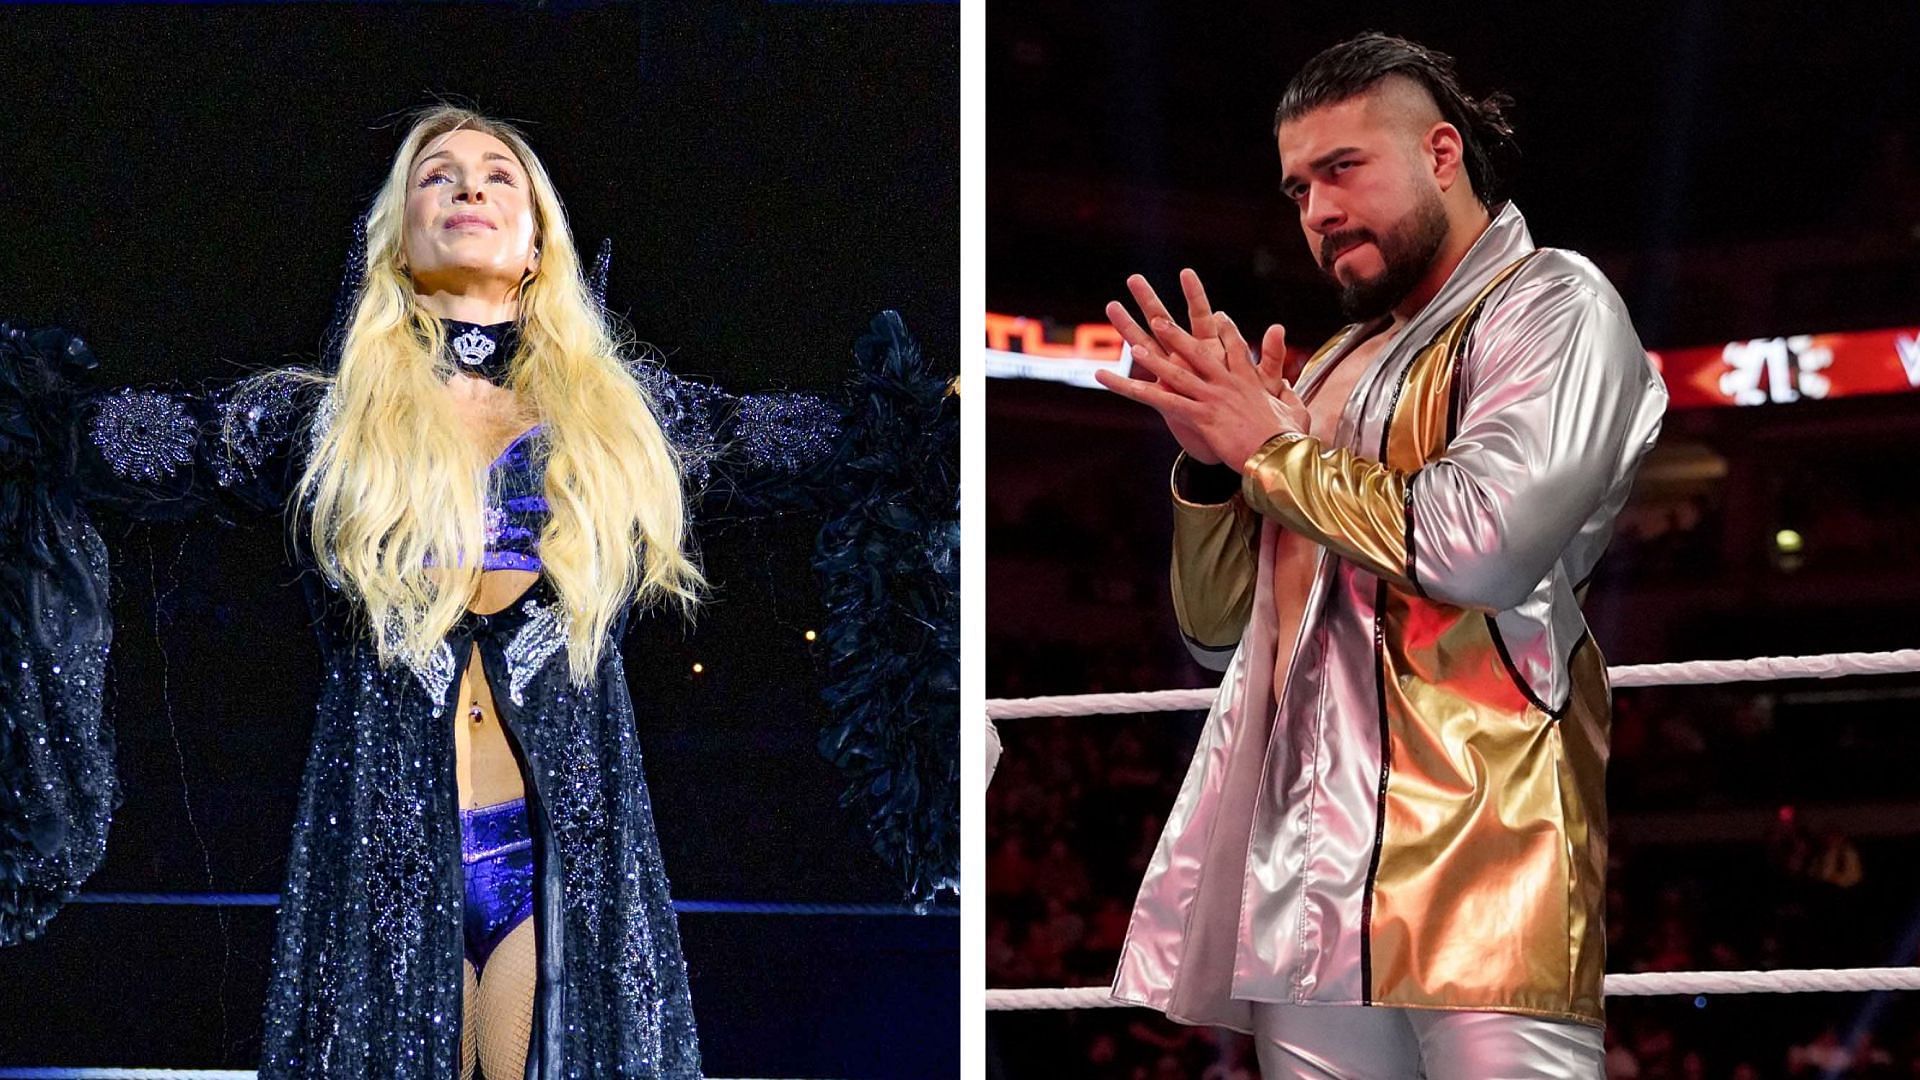 Andrade and Charlotte Flair could unite on WWE programming